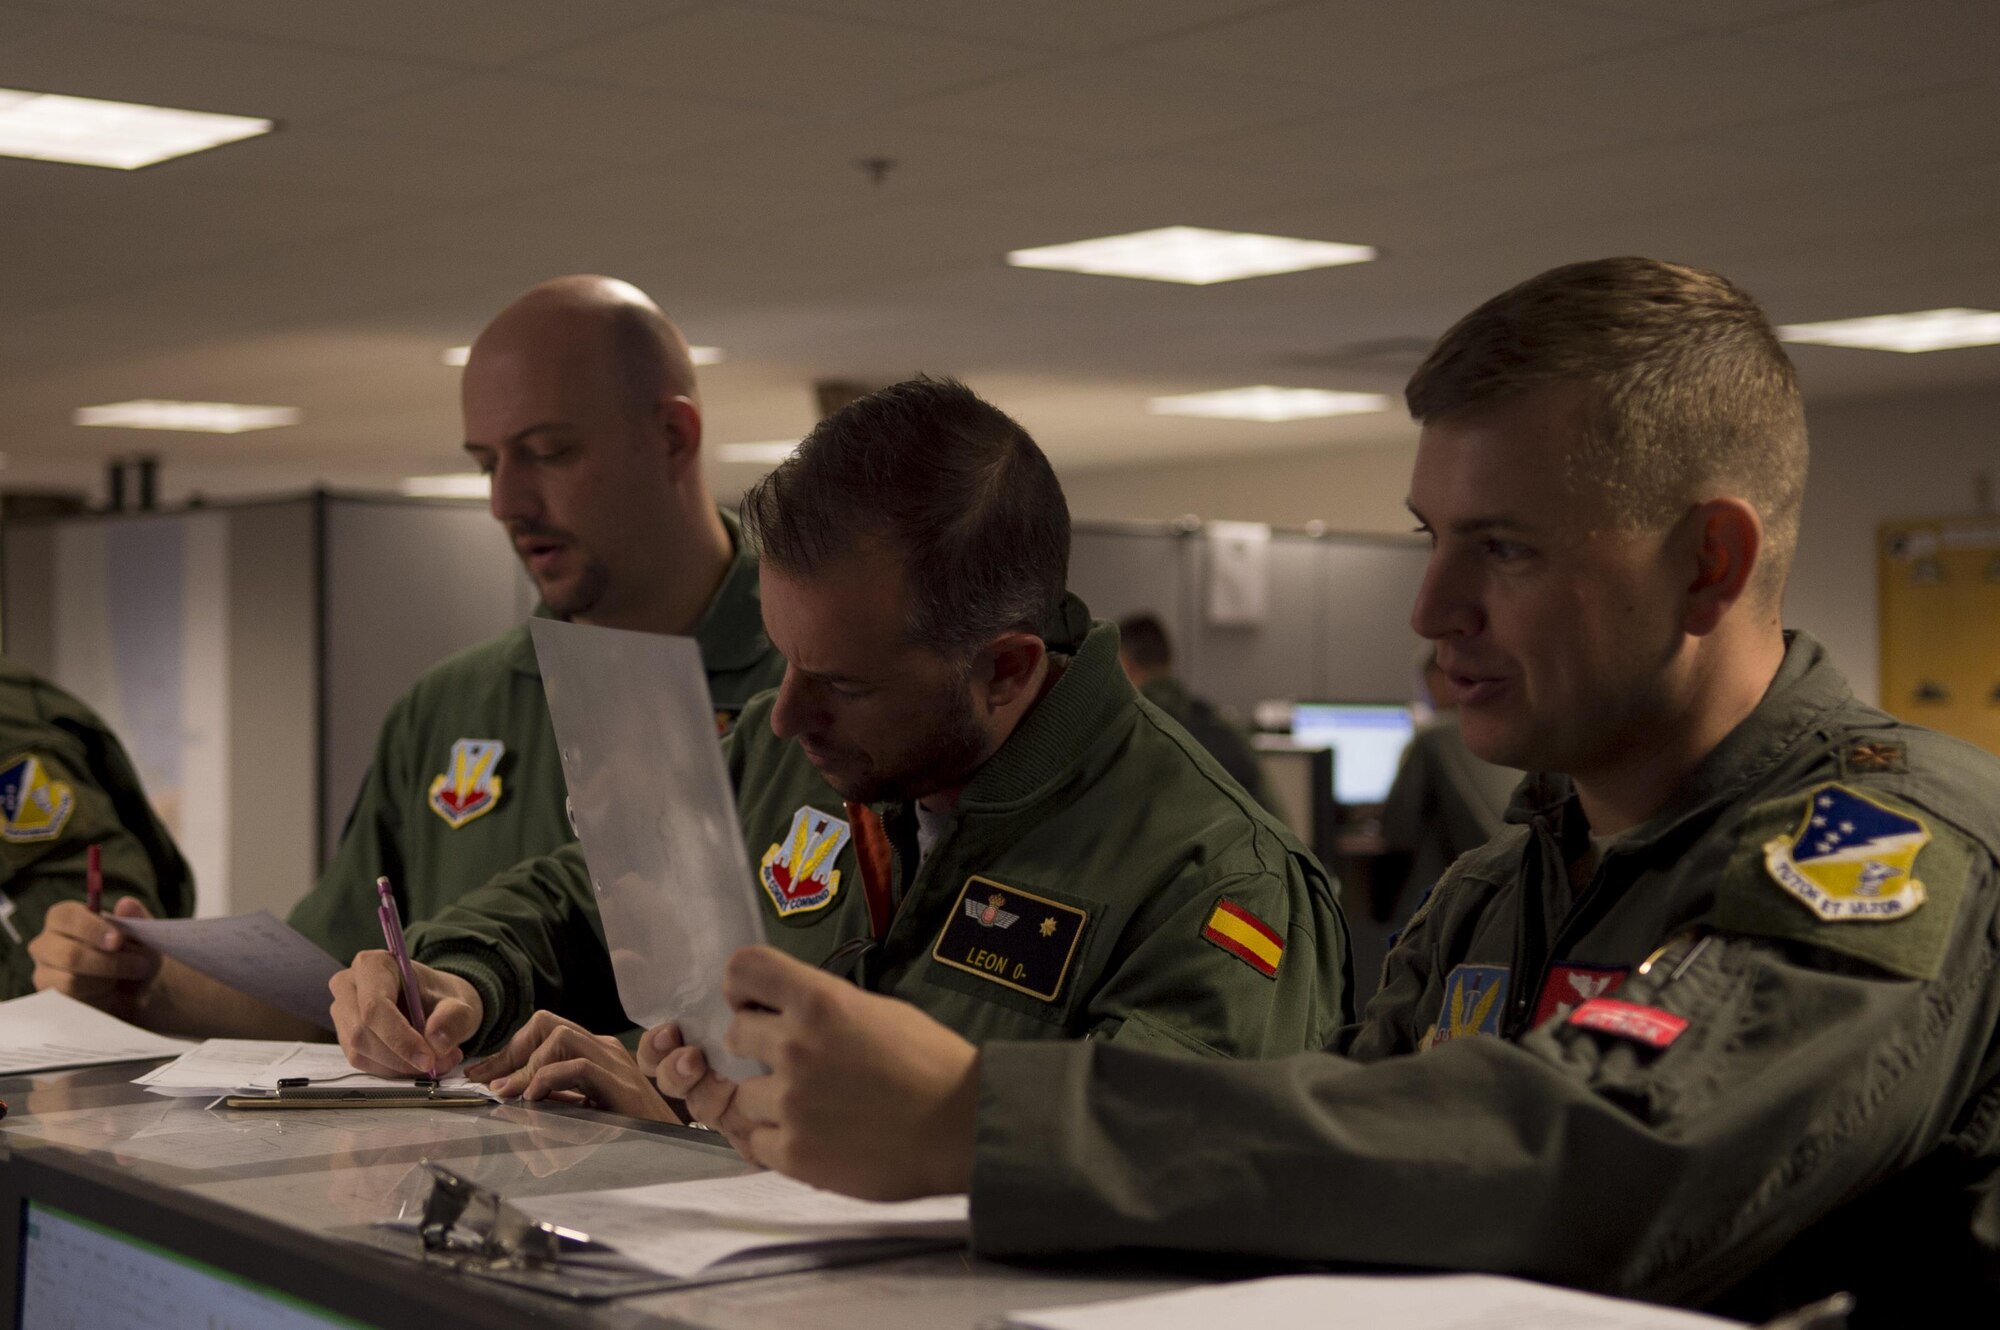 Maj. Aaron, a 29th Attack Squadron MQ-9 Reaper instructor pilot, right, Maj. Jaime, a Spanish air force student pilot, middle, and Staff Sgt. Francisco, a Spanish air force student sensor operator, left, review MQ-9 information at the step desk prior to a flight, at Holloman Air Force Base, N.M. on April 5, 2017. Spain is currently participating in essential training here at the MQ-9 formal training unit. (U.S. Air Force photo by Tech. Sgt. Amanda Junk)